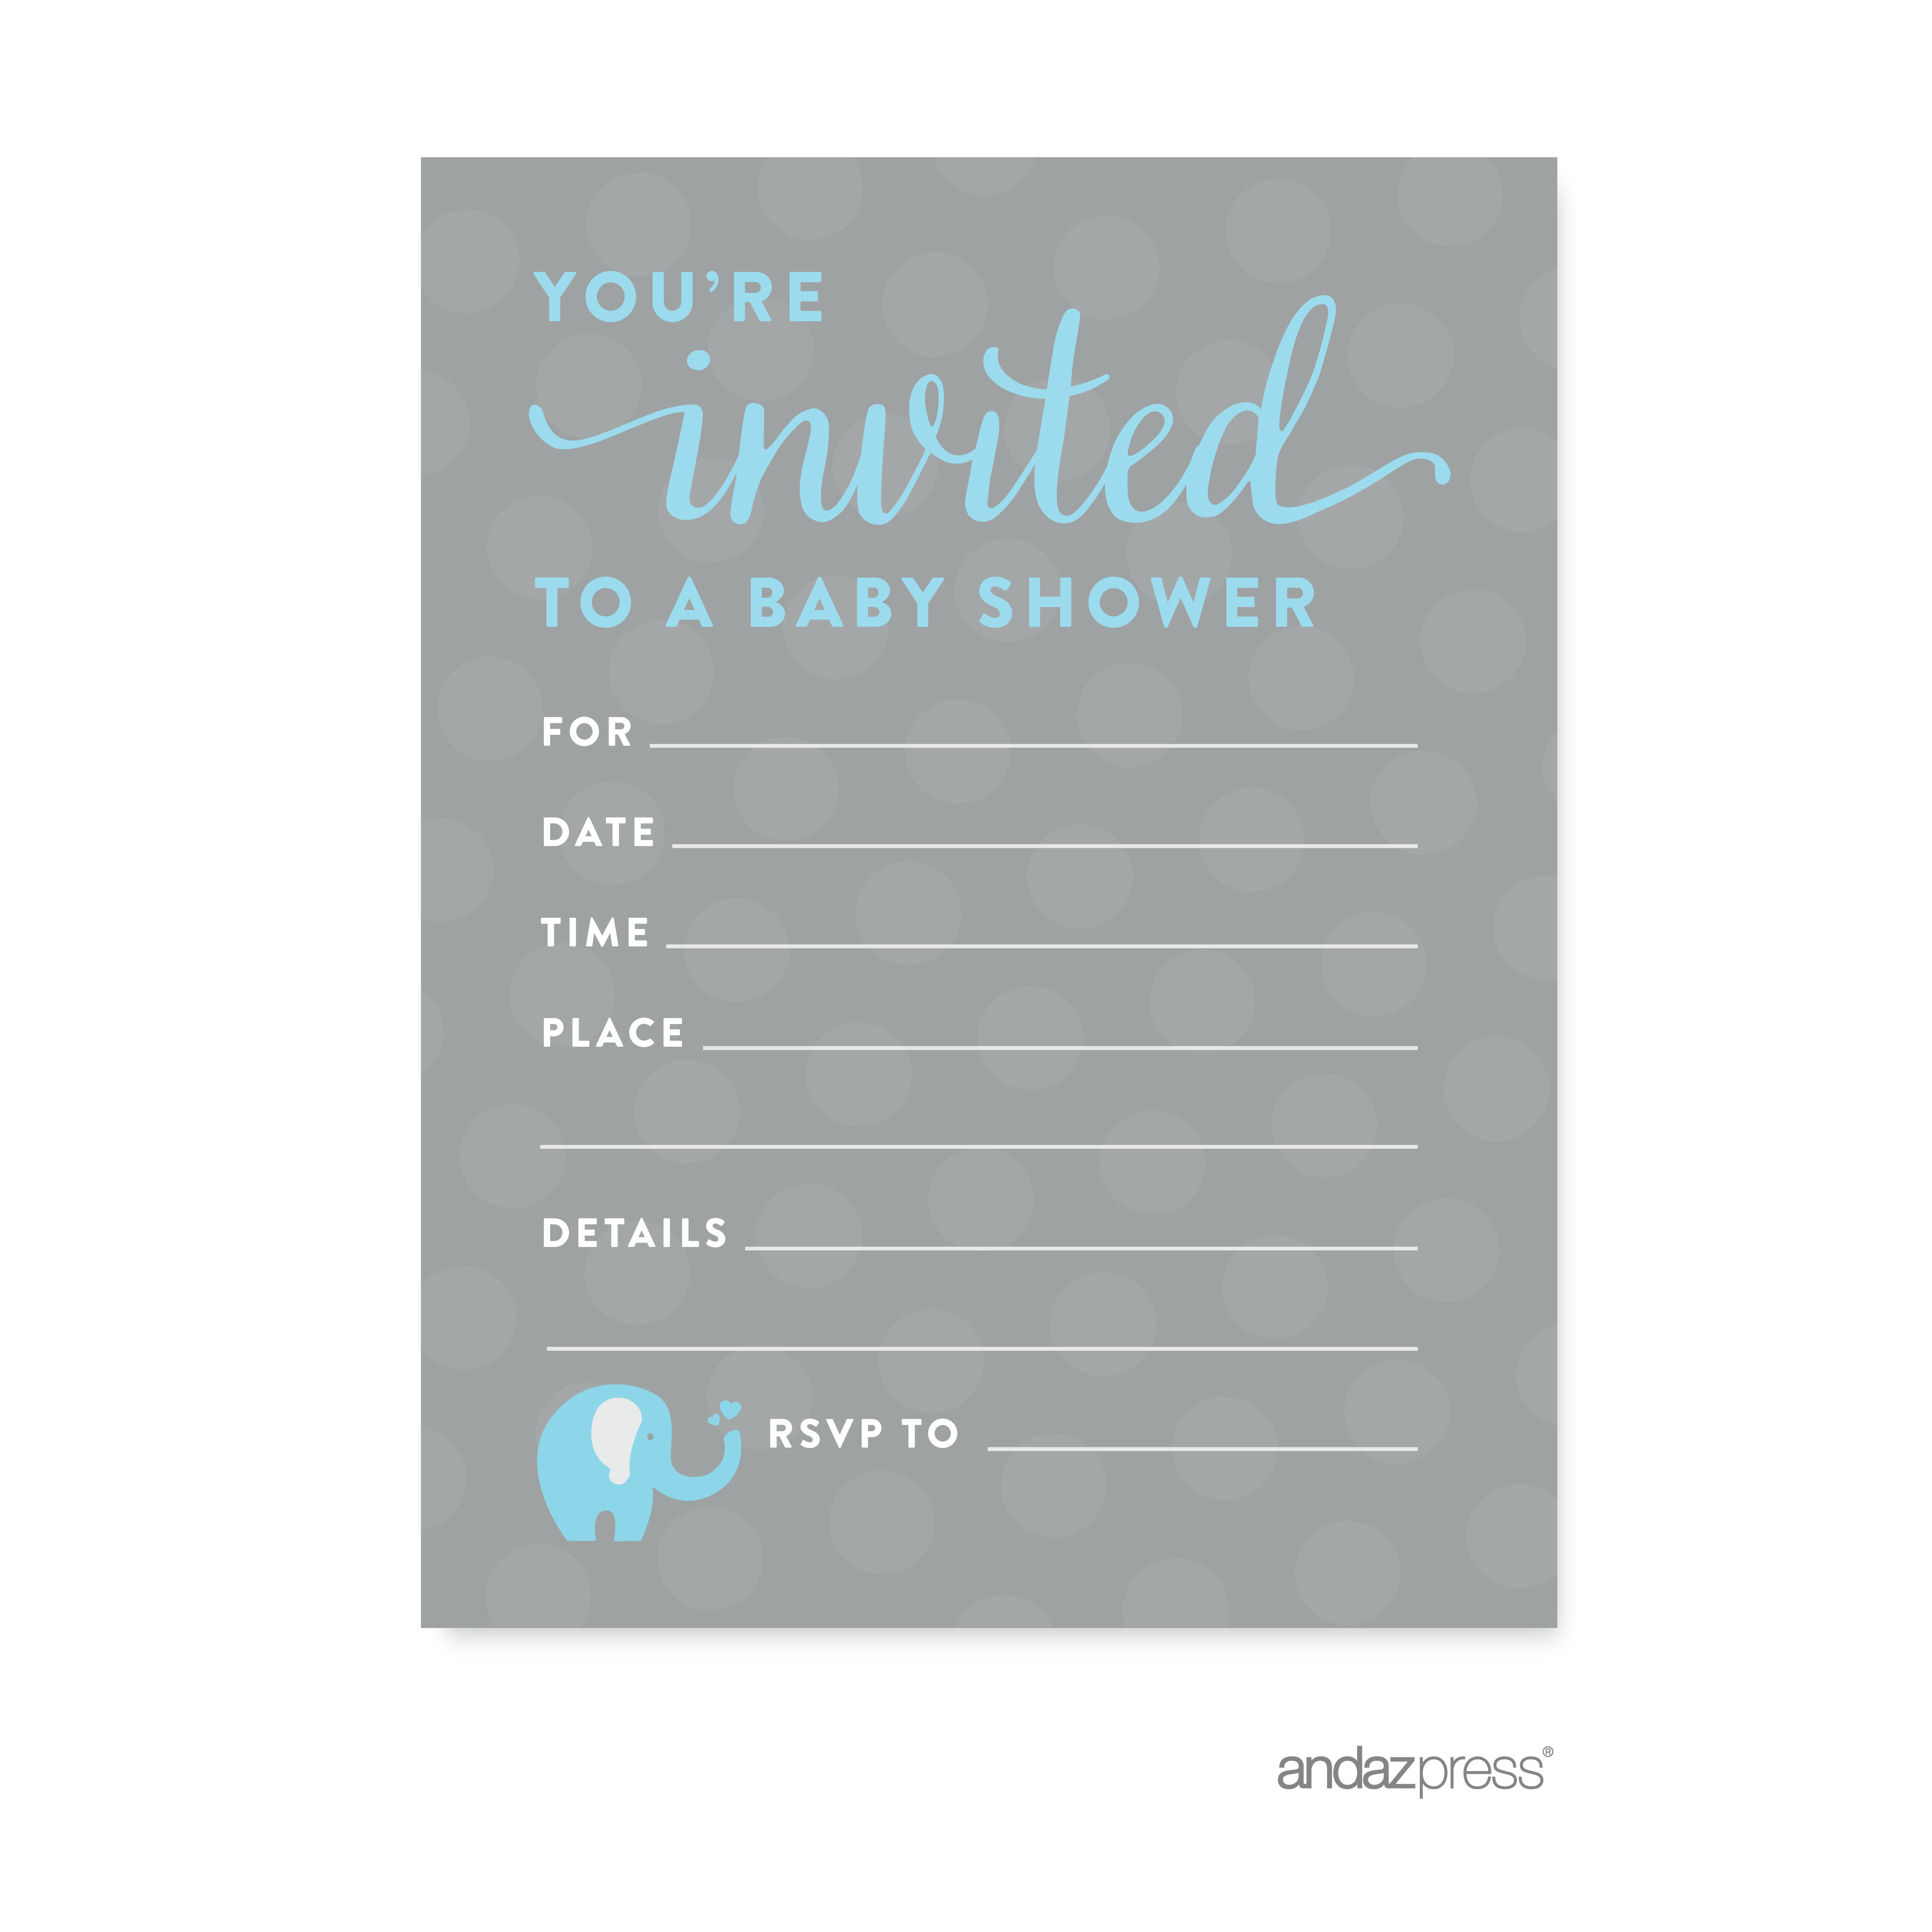 Full Size of Baby Shower:nautical Baby Shower Invitations For Boys Baby Girl Themes For Bedroom Baby Shower Ideas Baby Shower Decorations Themes For Baby Girl Nursery Unique Baby Shower Ideas Girl Baby Shower Decorations Baby Shower Invitations For Boys Baby Boy Shower Ideas